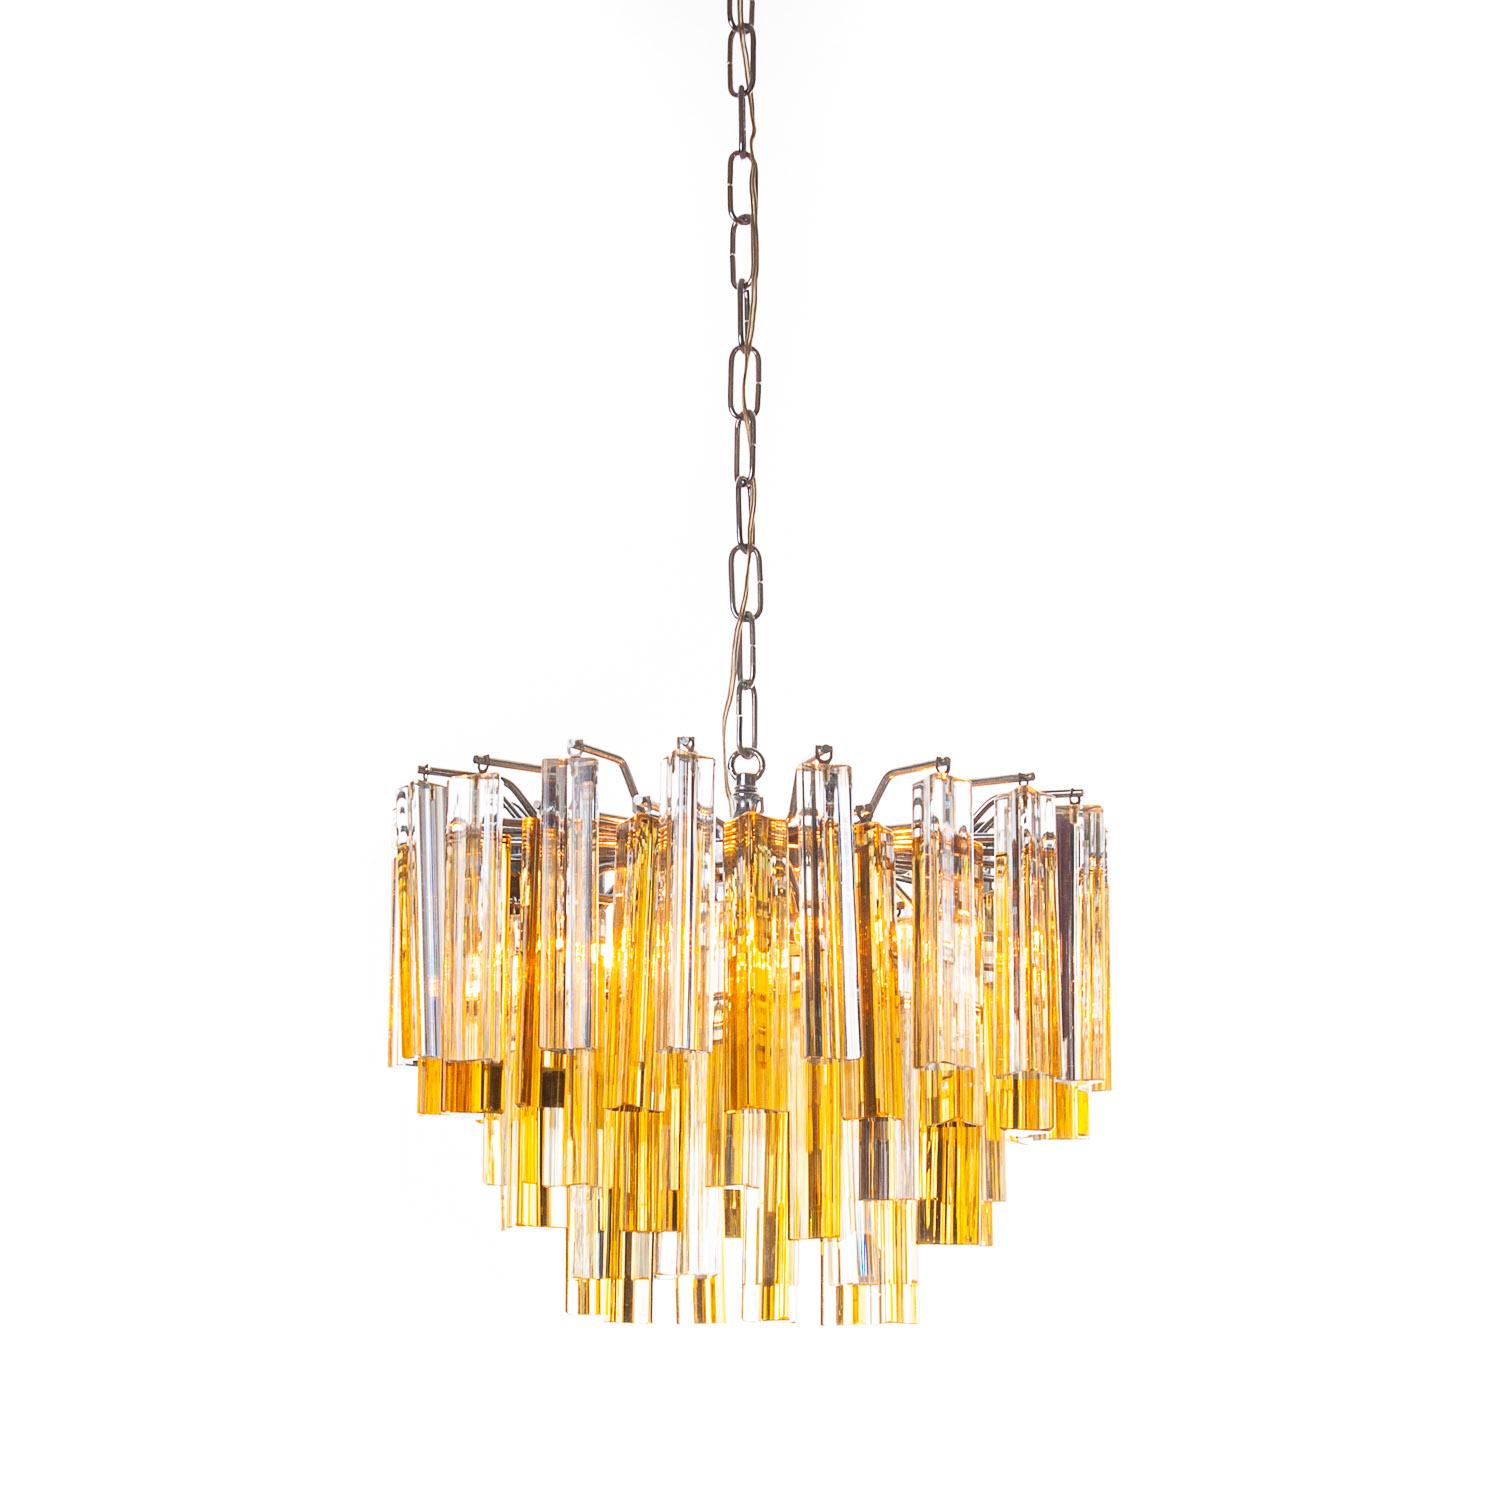 Mid-Century Modern 1960s Glass and Chrome Chandelier Attributed to Venini For Sale